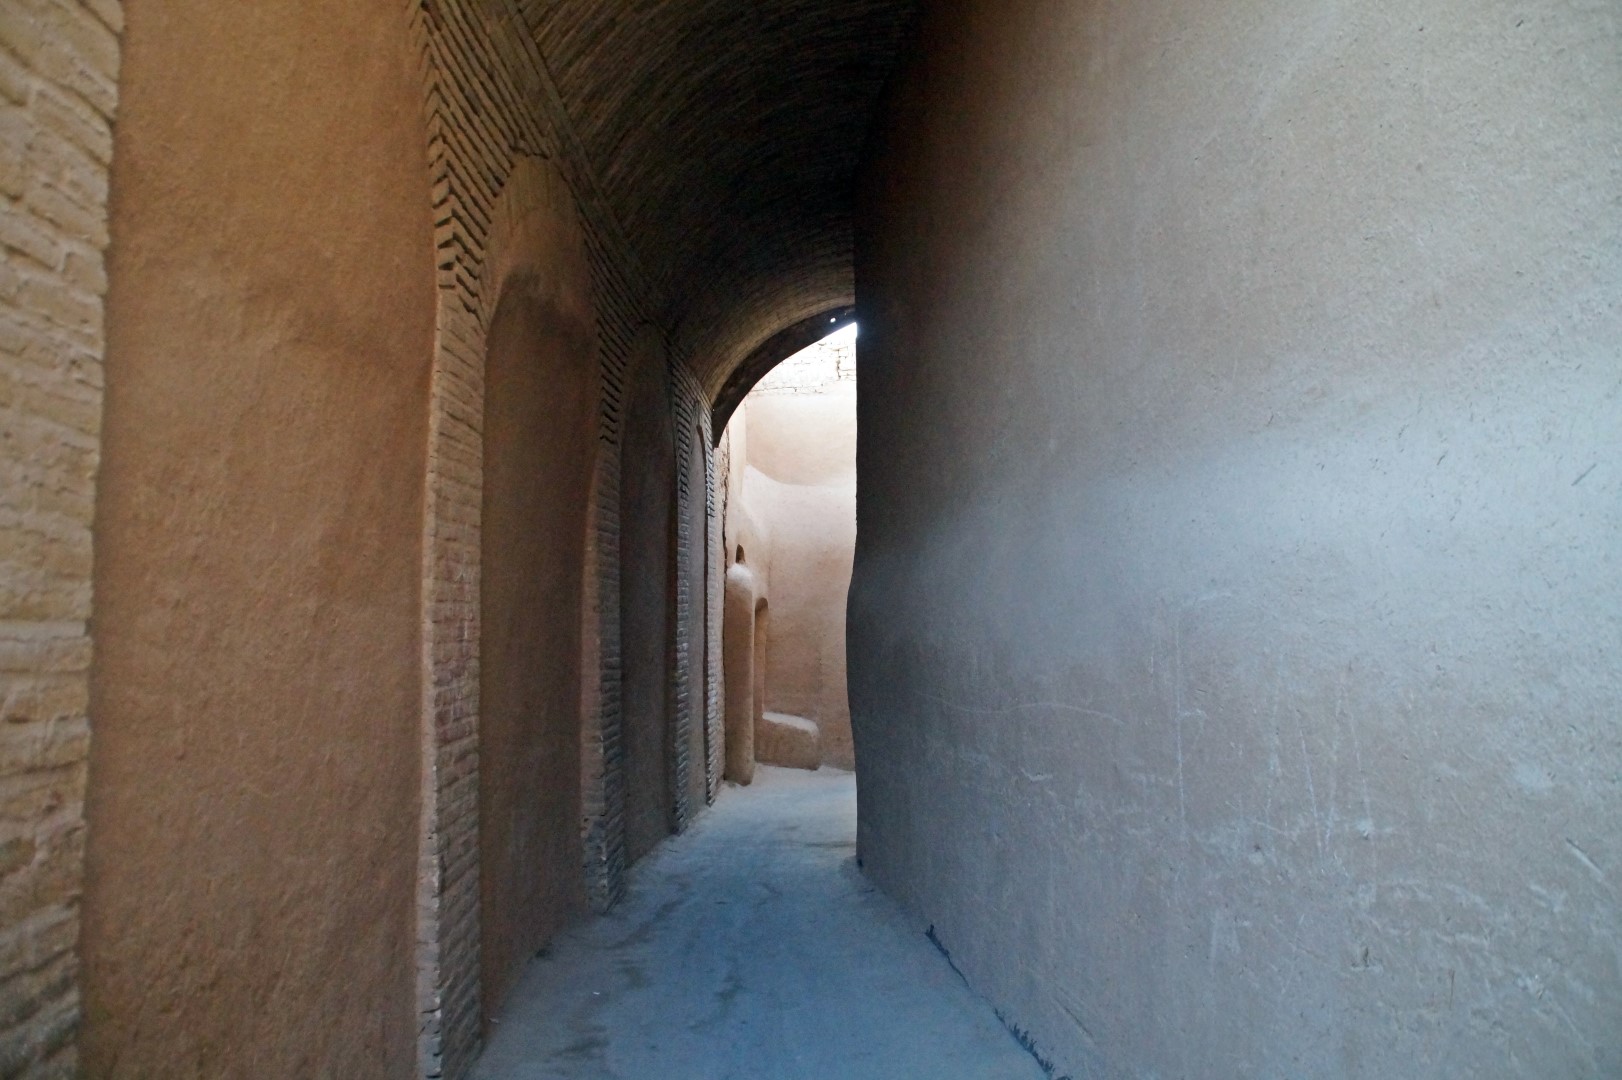 The cozy streets of Yazd